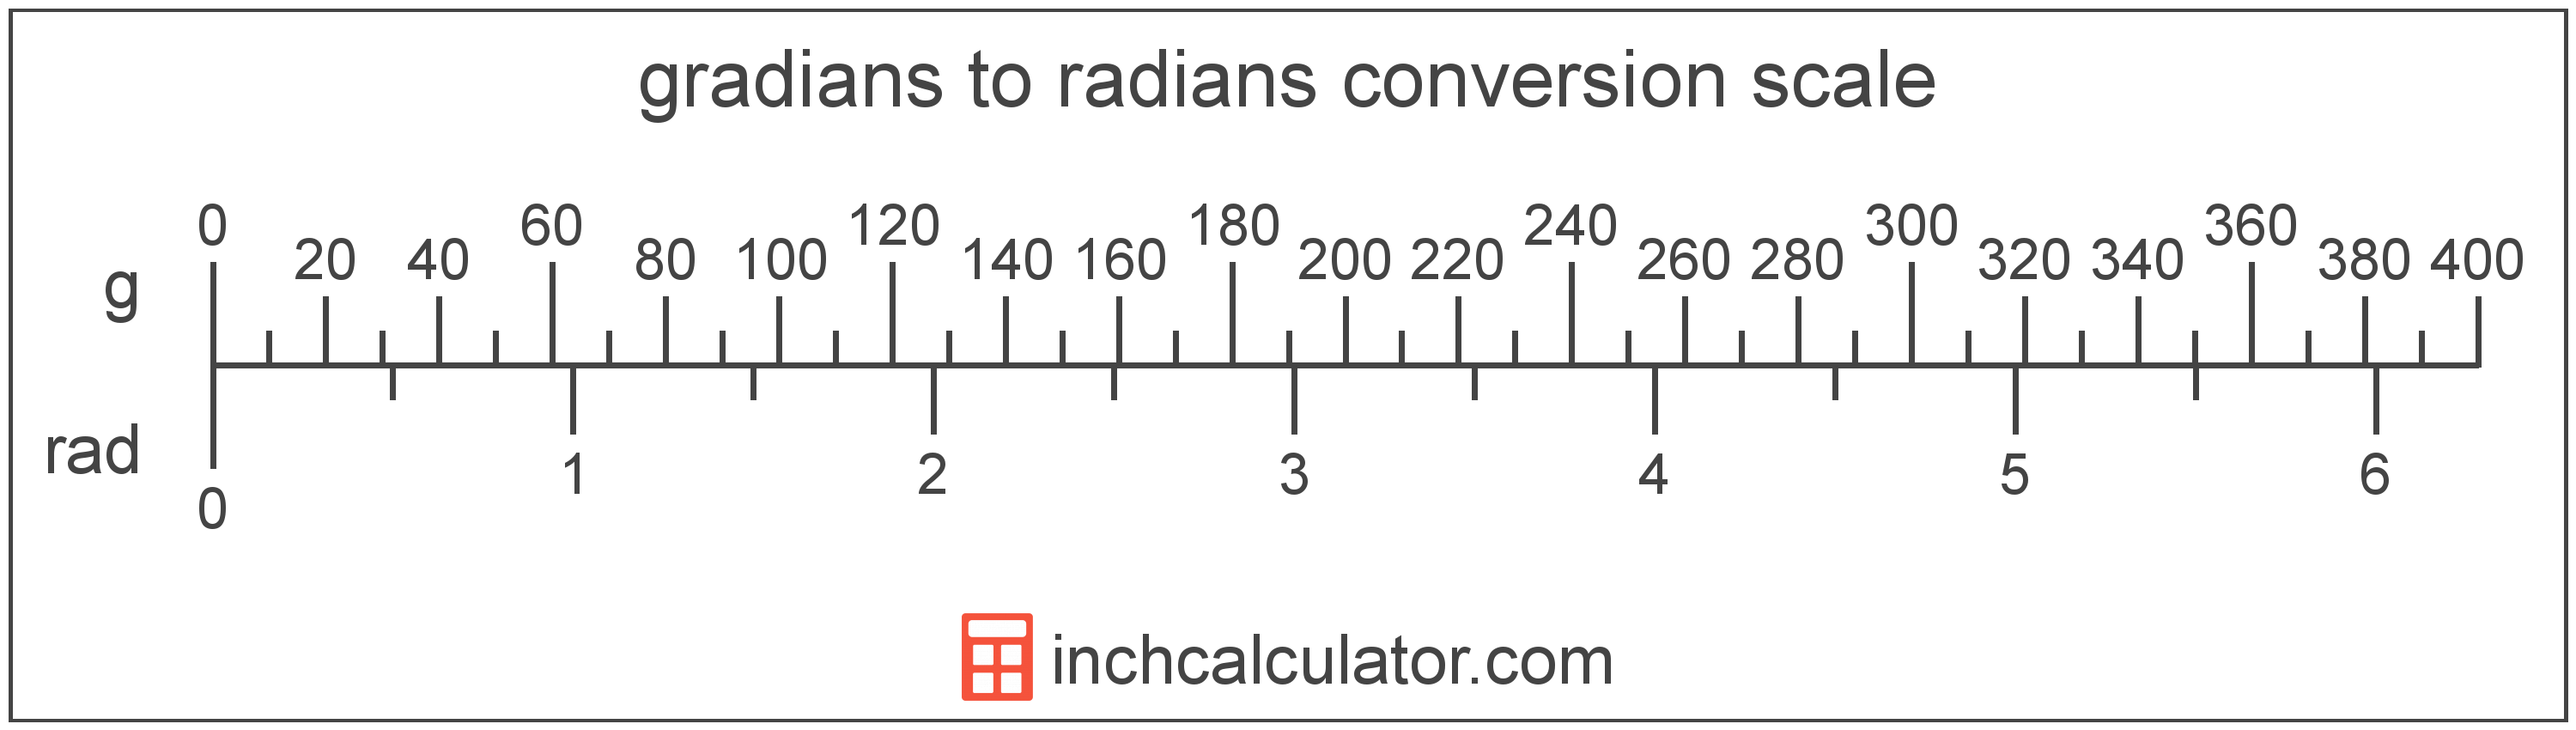 conversion scale showing radians and equivalent gradians angle values